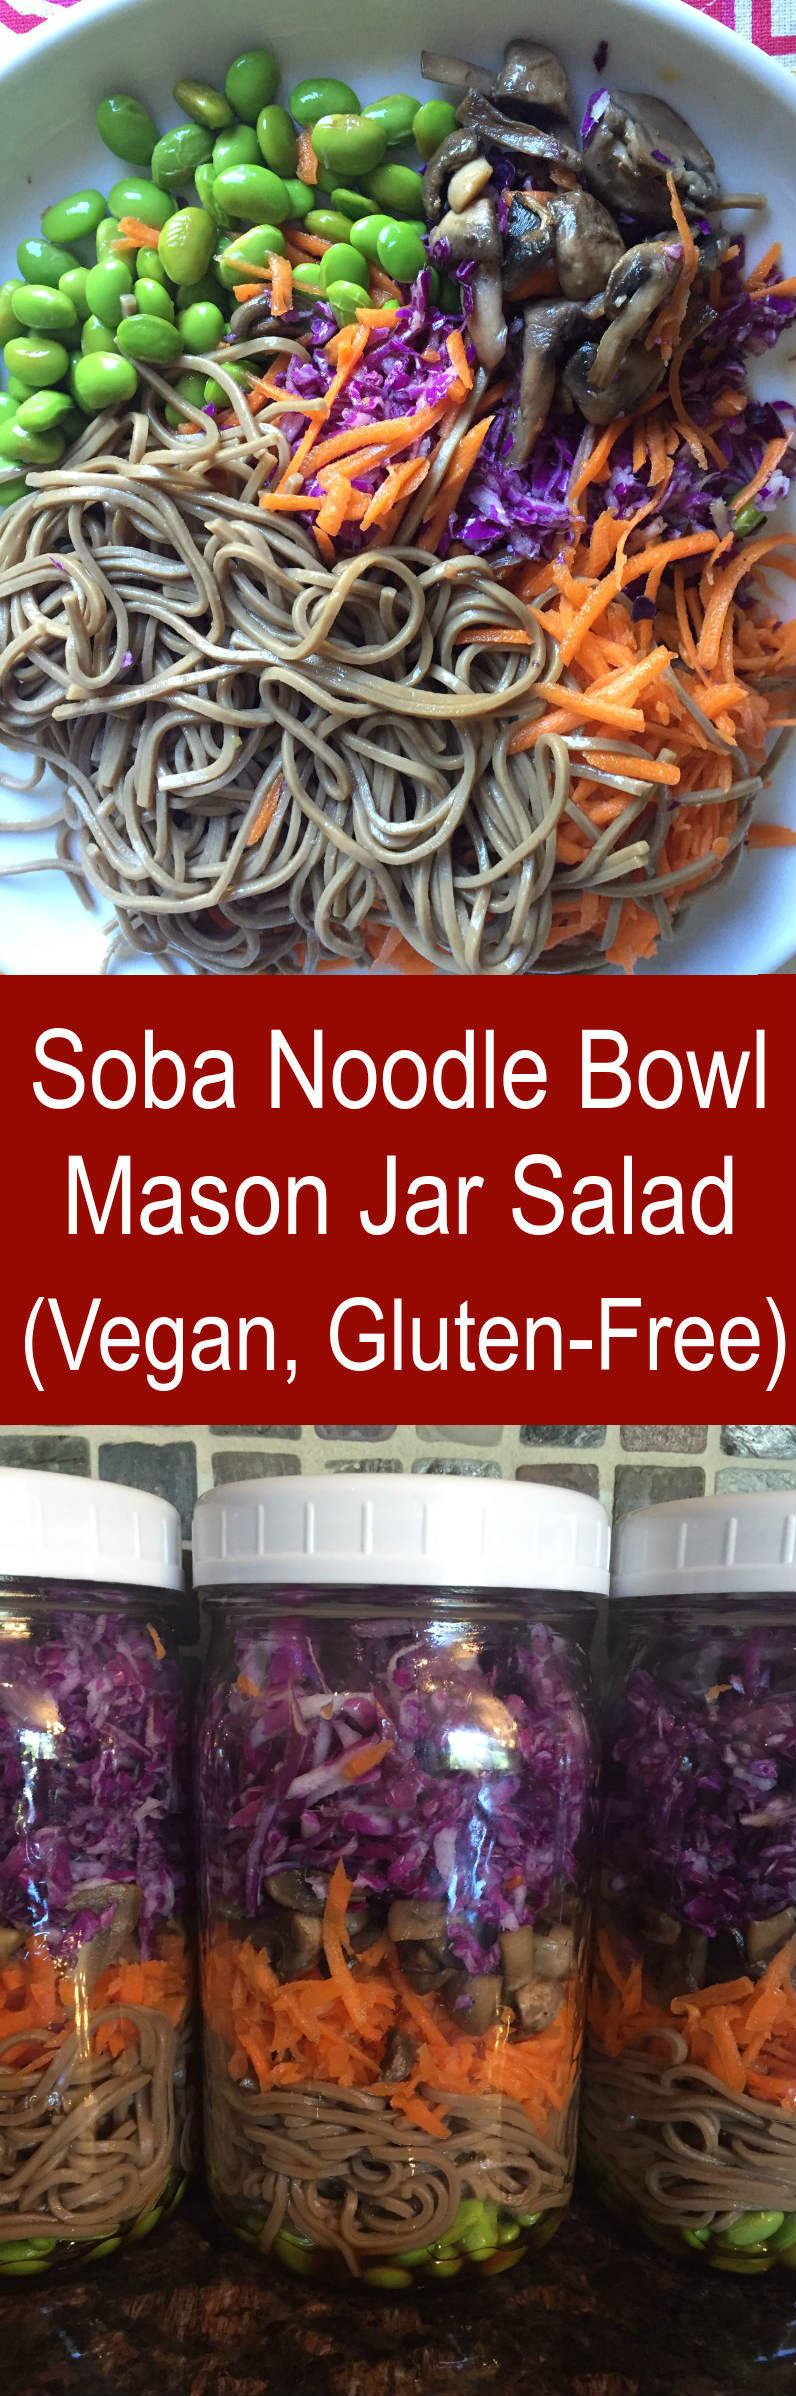 Japanese Soba Noodle Bowl Mason Jar Salad - Vegan and Gluten-Free! Super healthy and packed with protein, it tastes amazing! | MelanieCooks.com